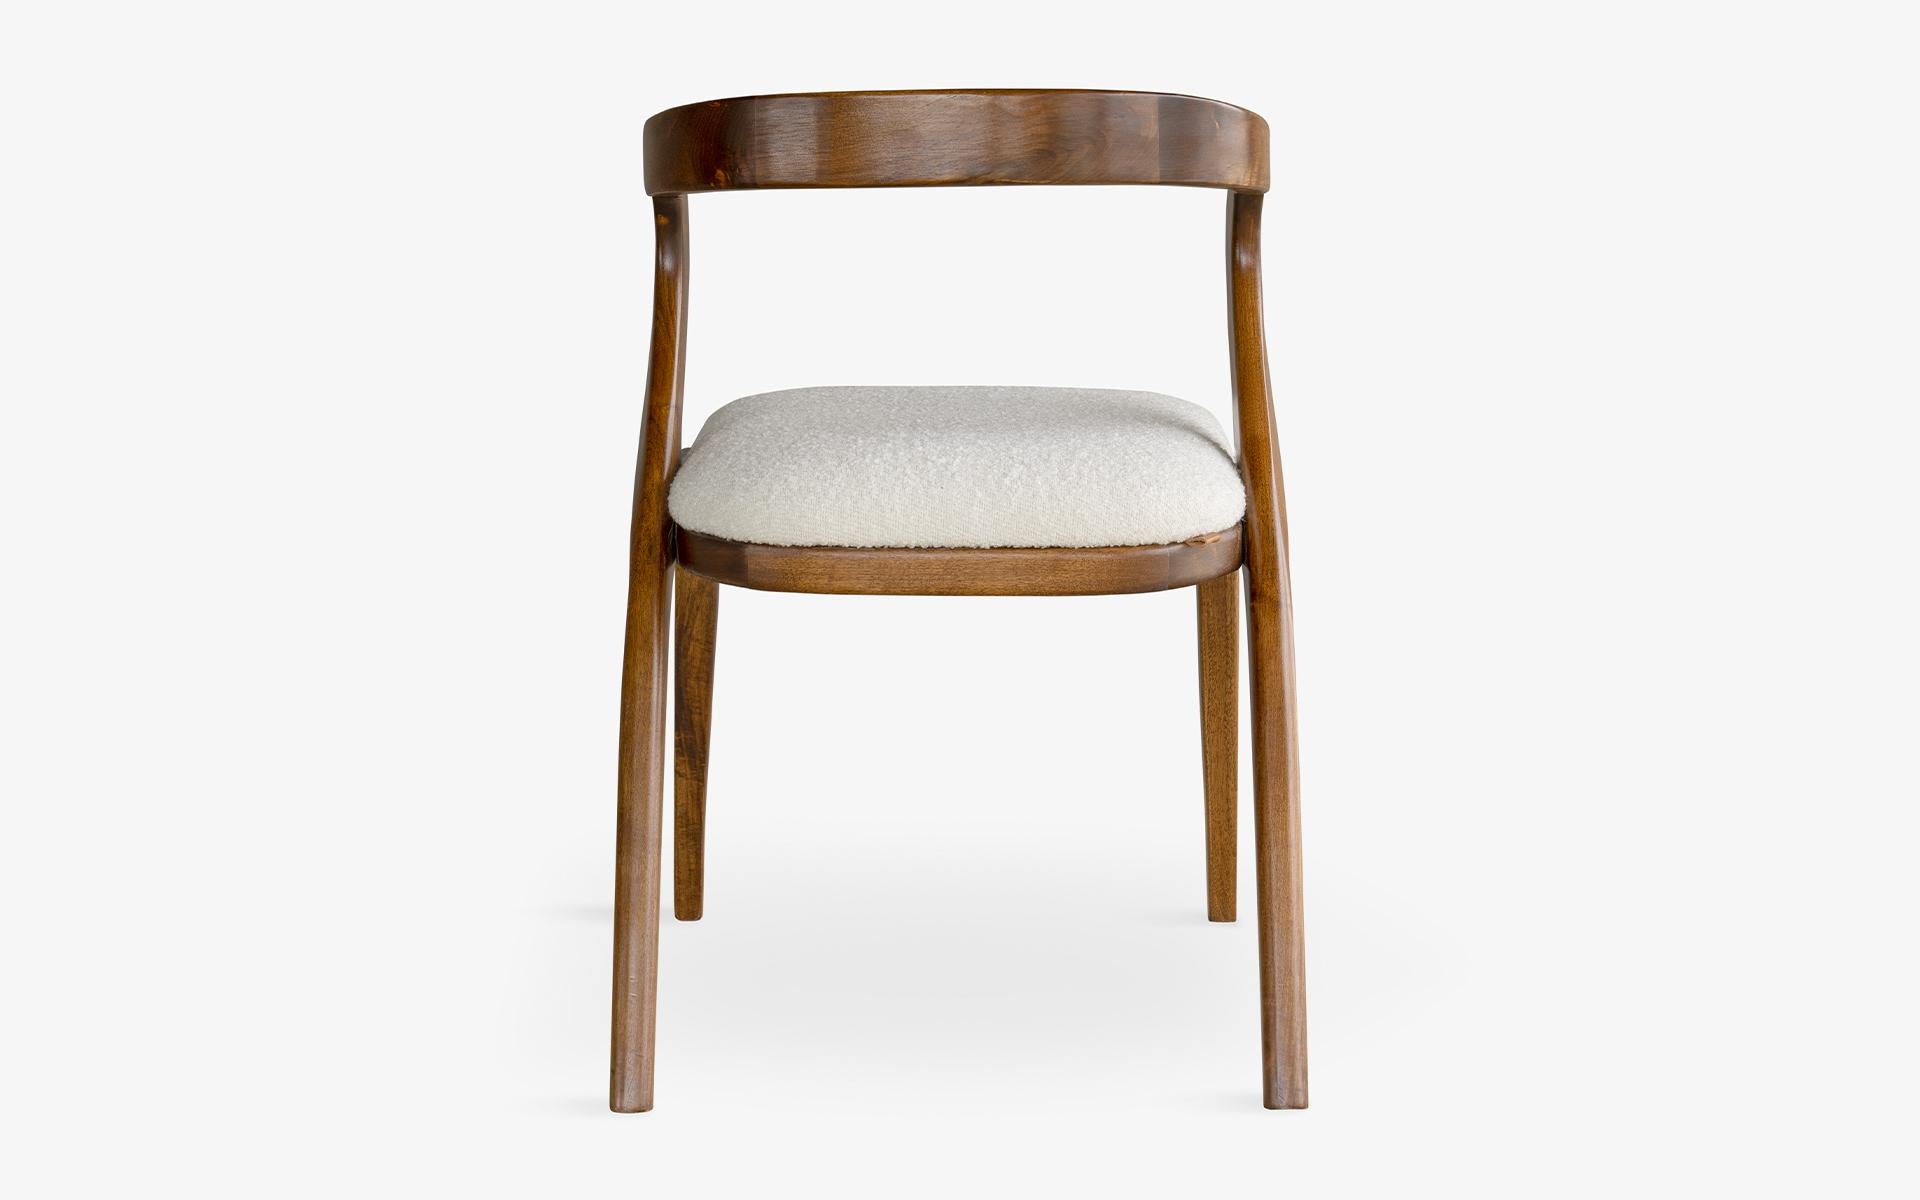 Upholstery Nana Wooden Dining Chair, No:1, Small, Lagu Selection 'Set of 6' For Sale